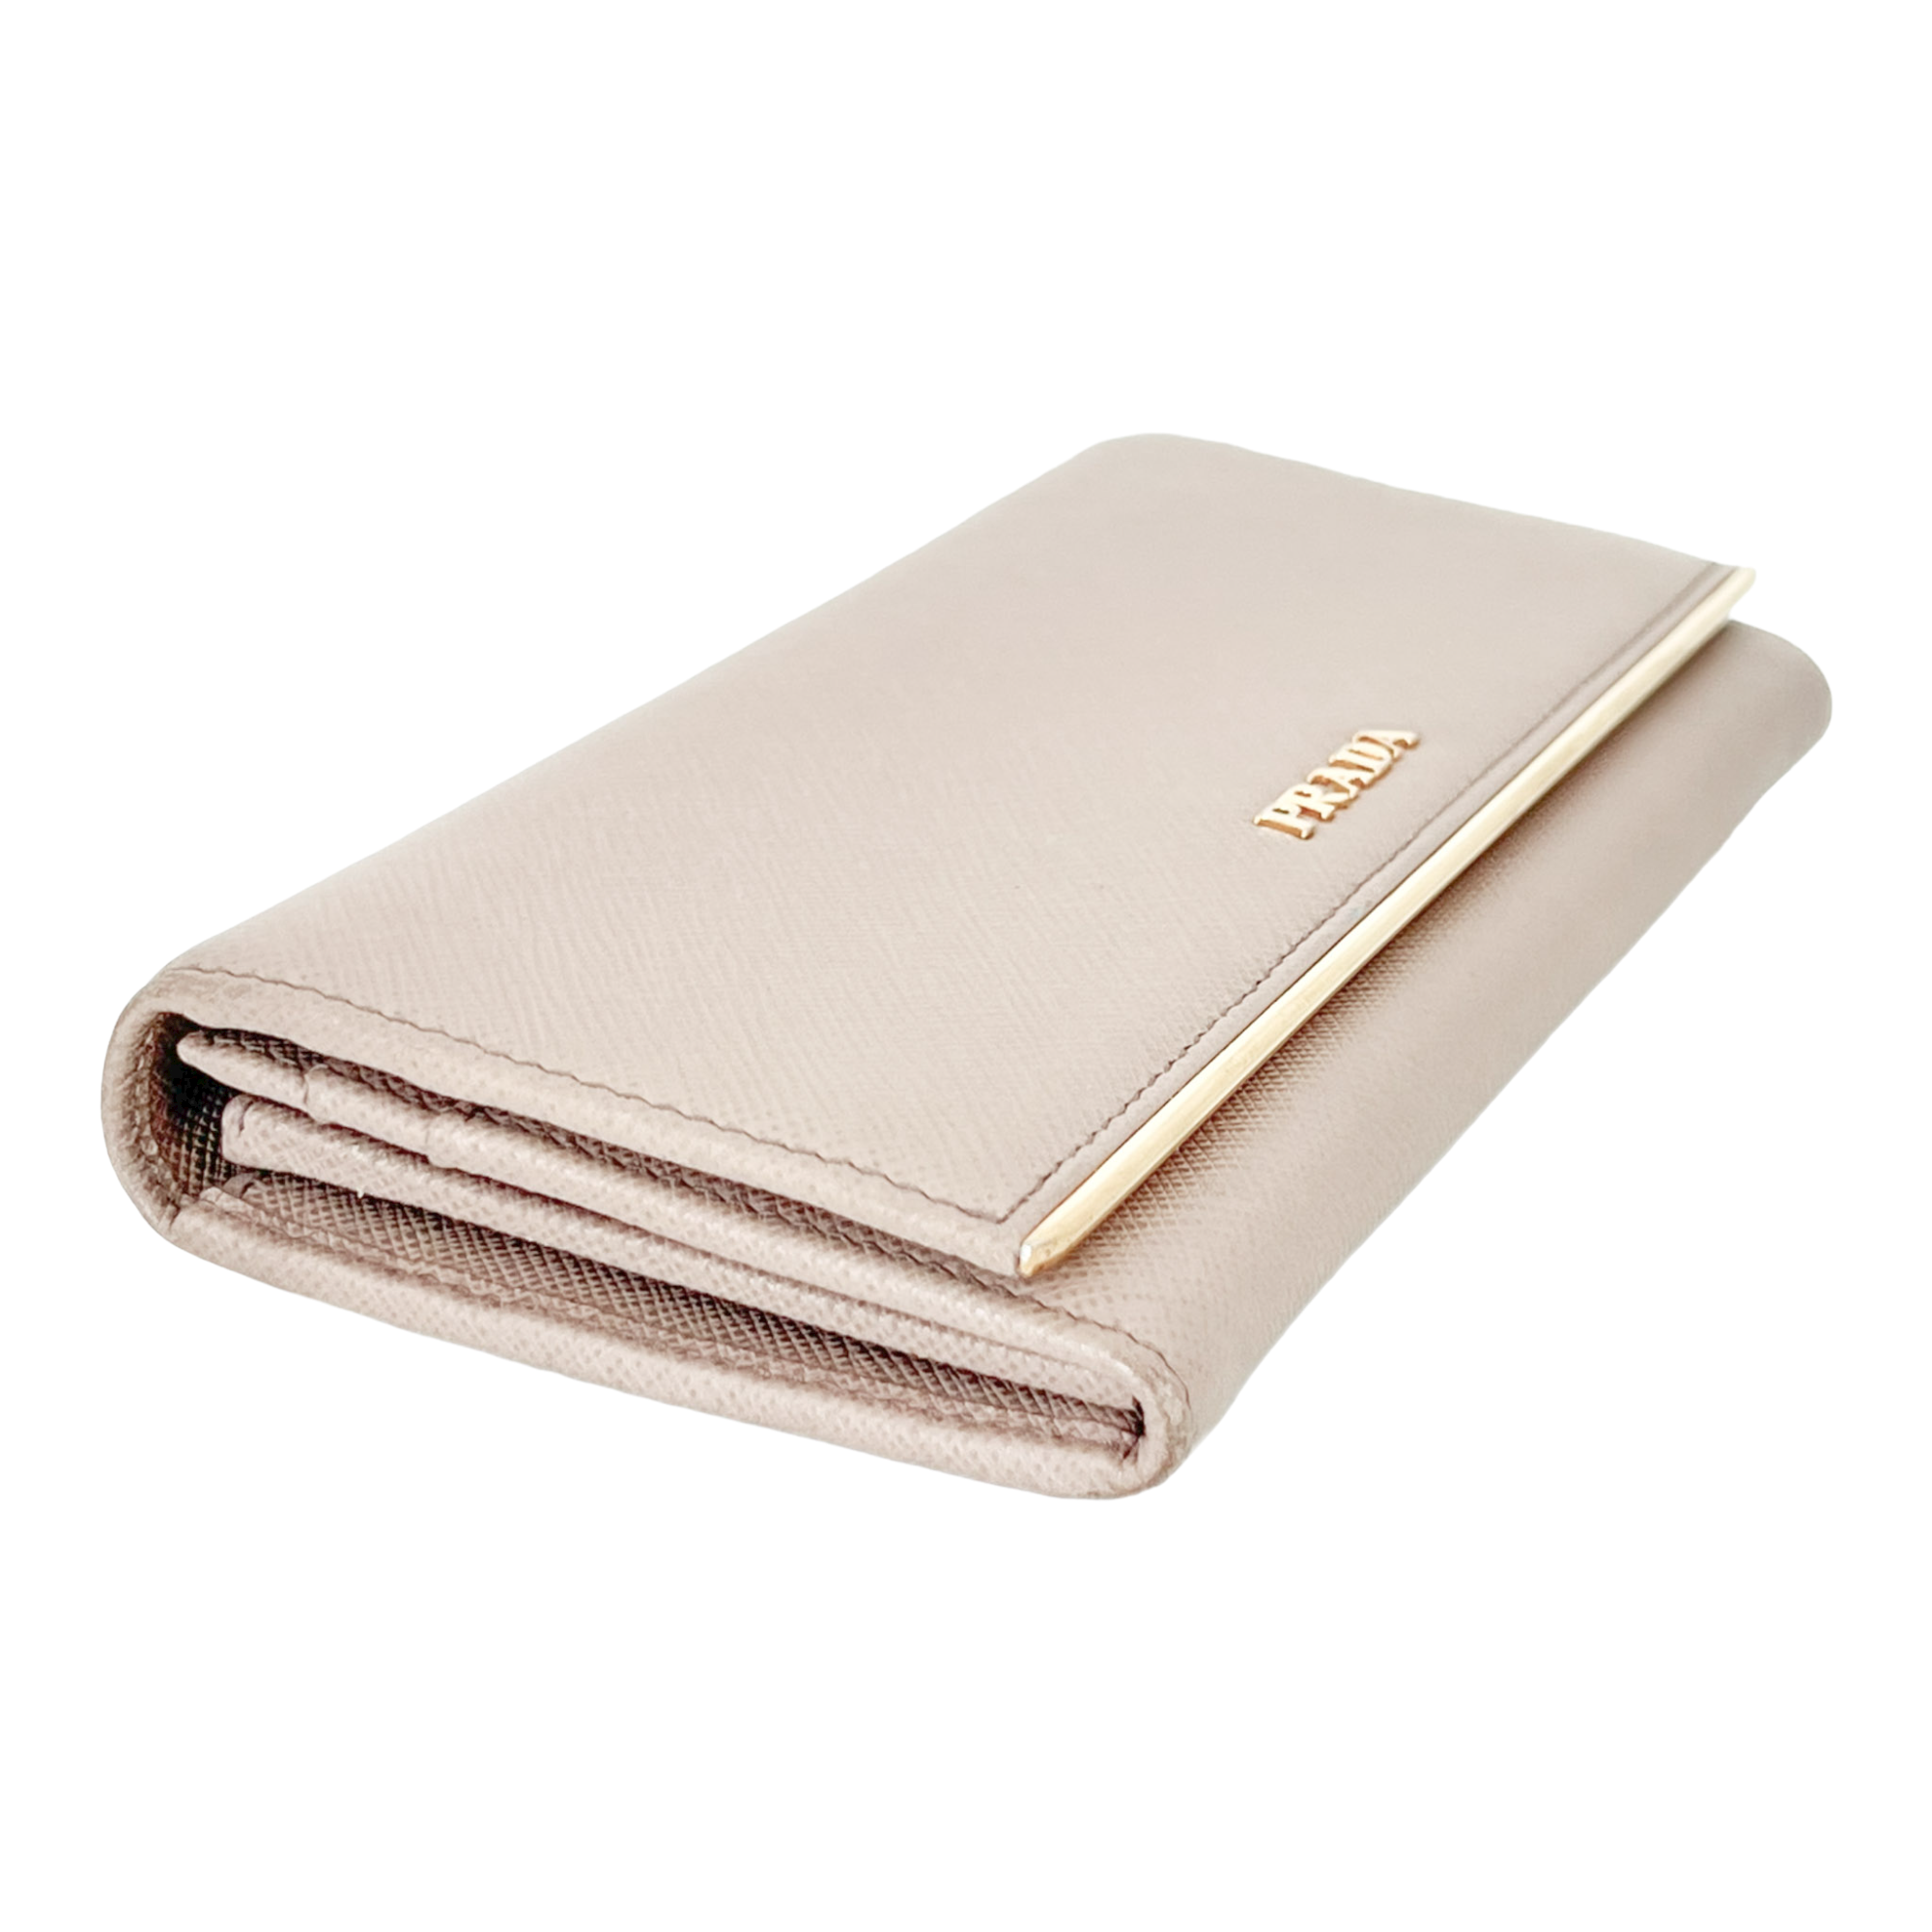 Beige Saffiano Wallet with Chain